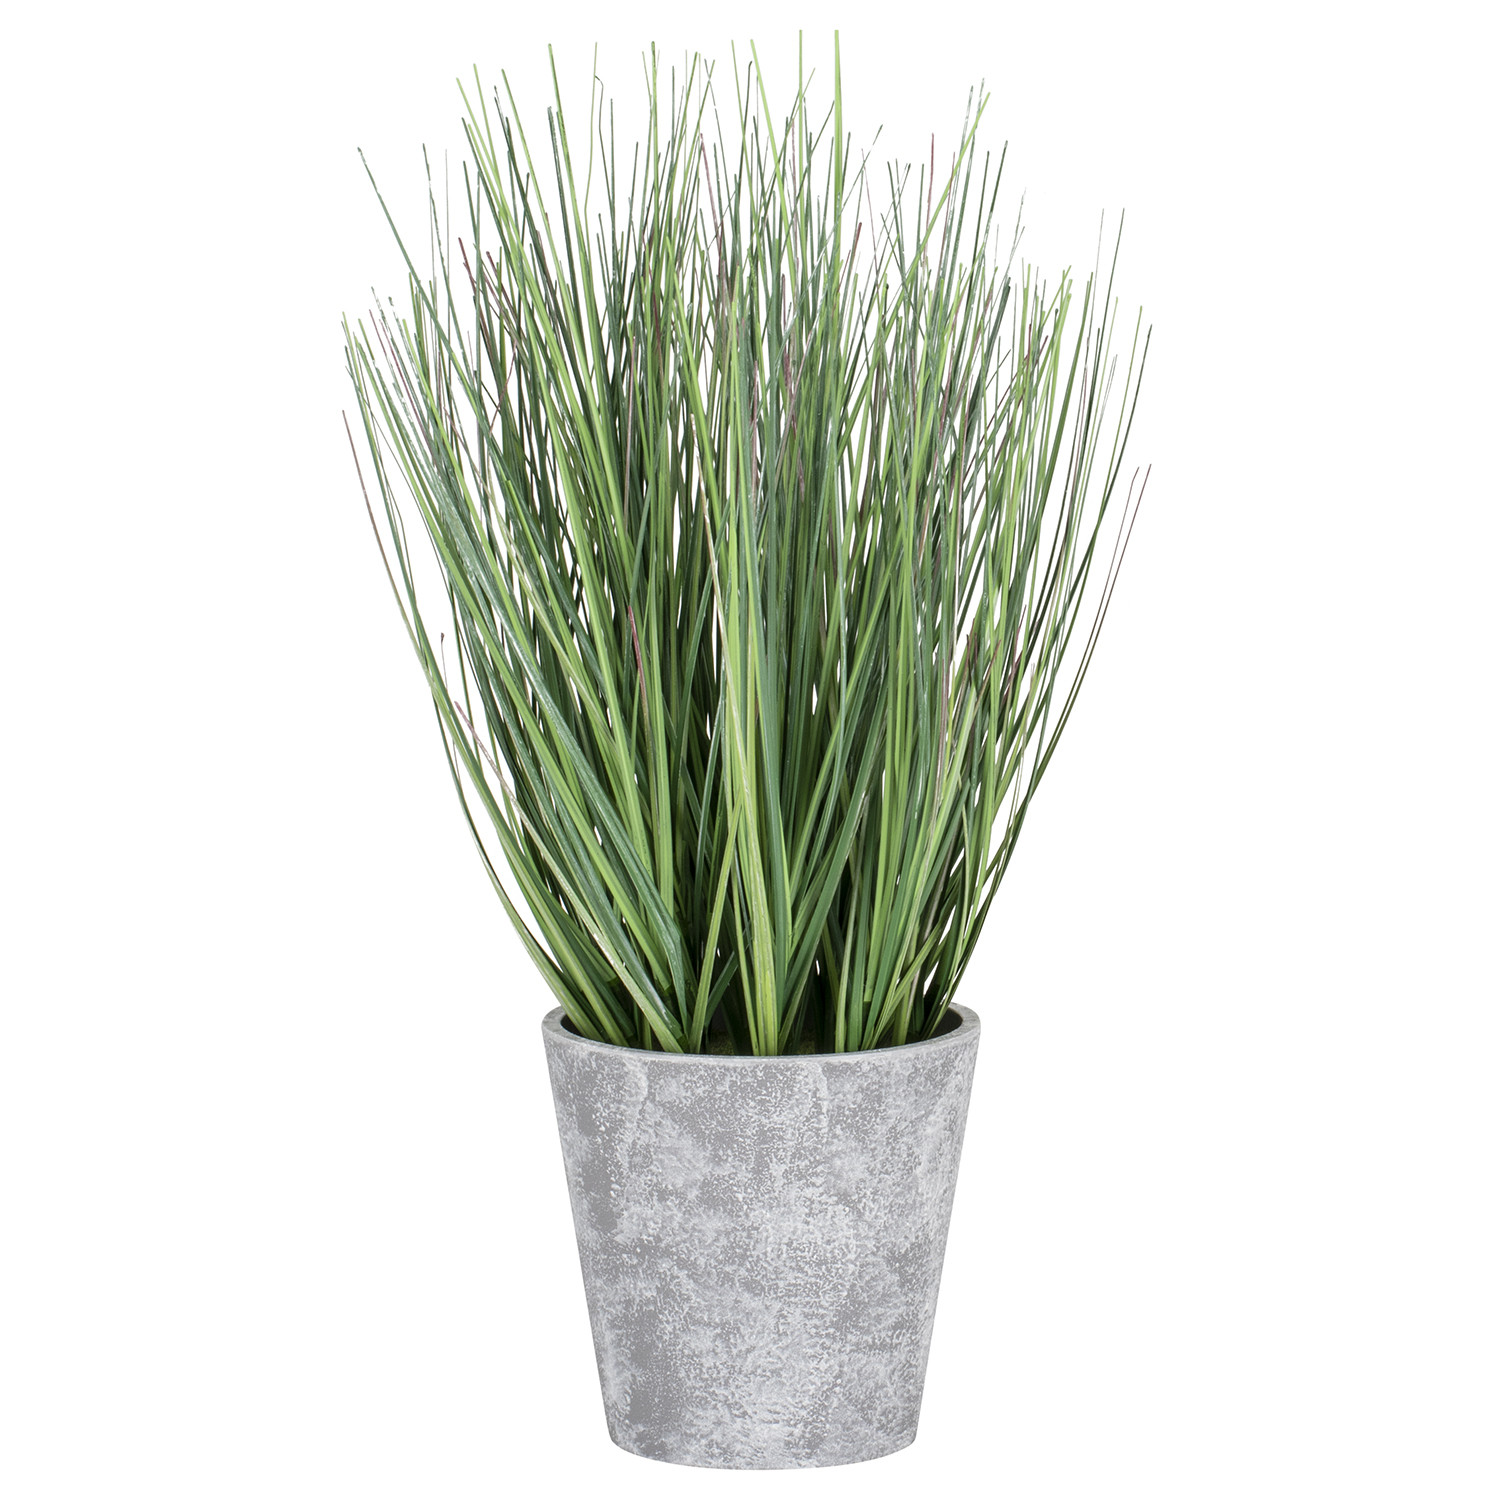 Onion Grass Artificial Plant in Pot Image